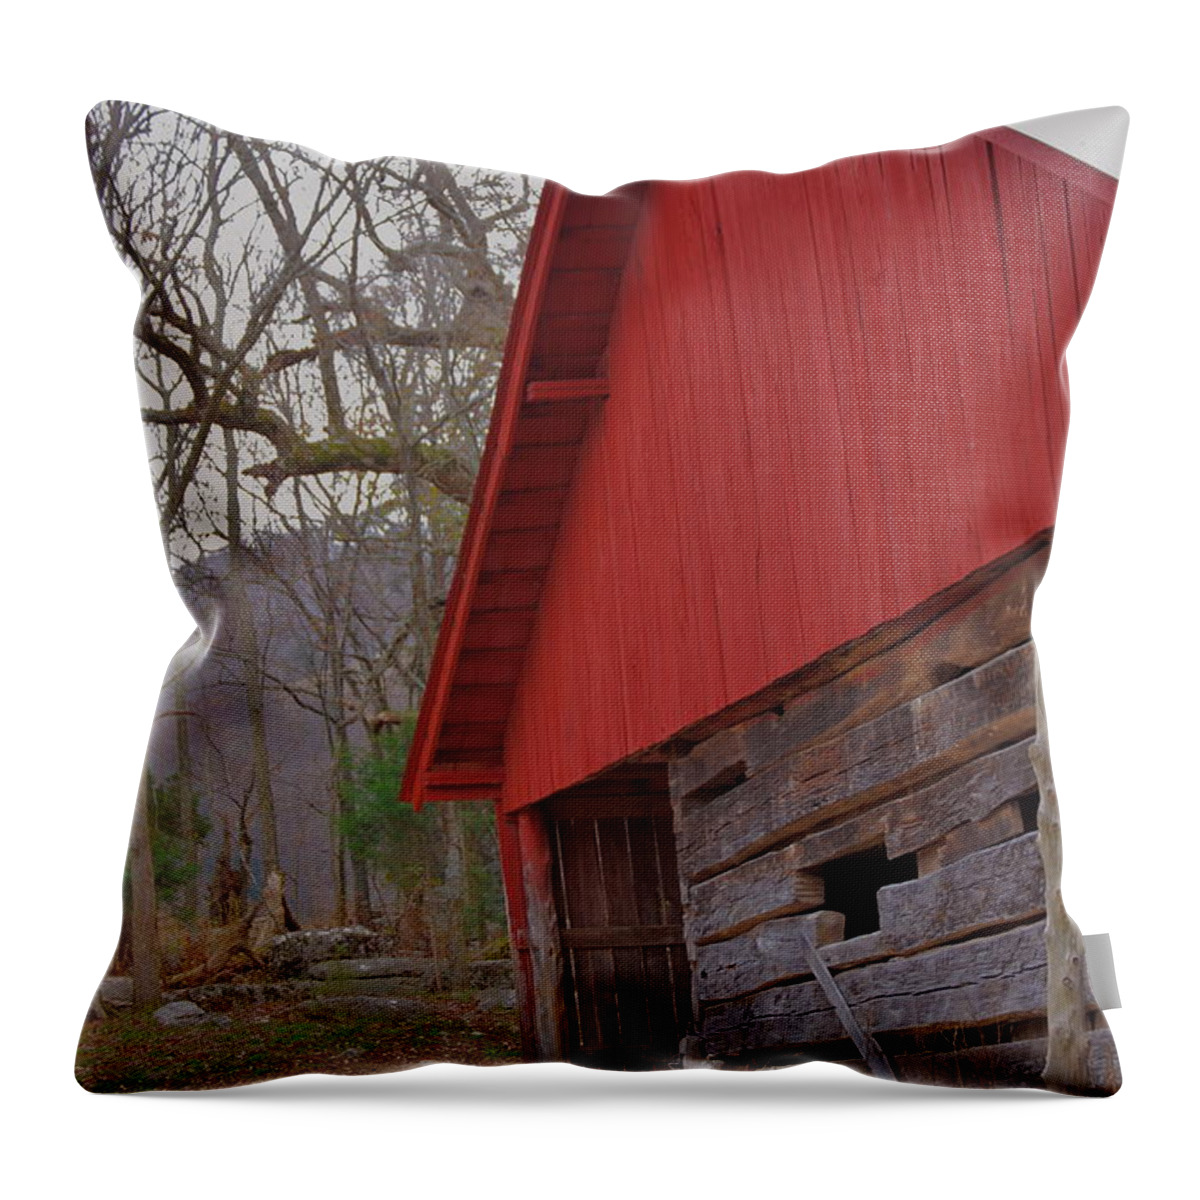 Barn Throw Pillow featuring the photograph Old Log Barn by Debbie Karnes